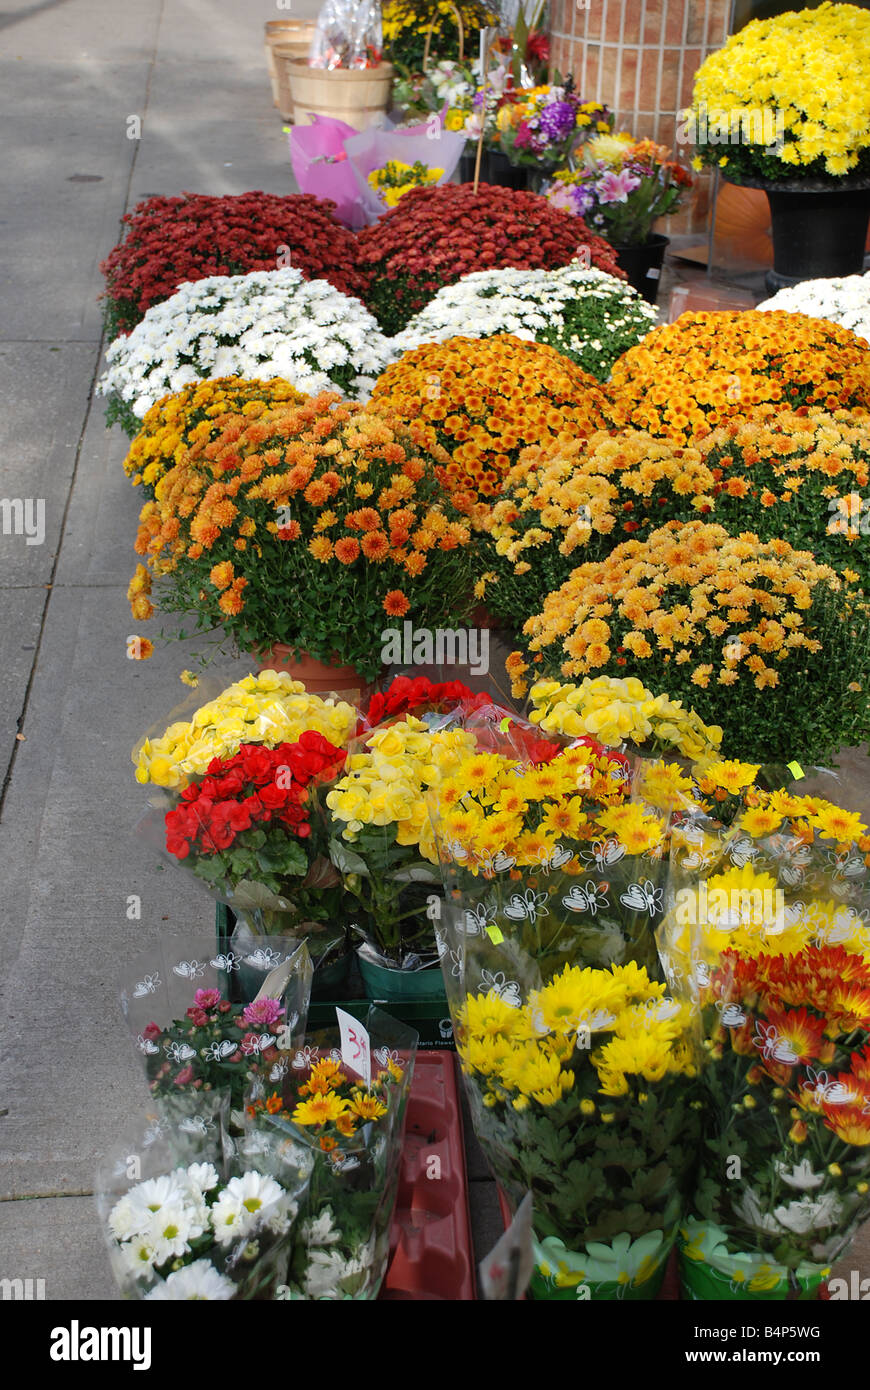 Display of colorful mums Stock Photo